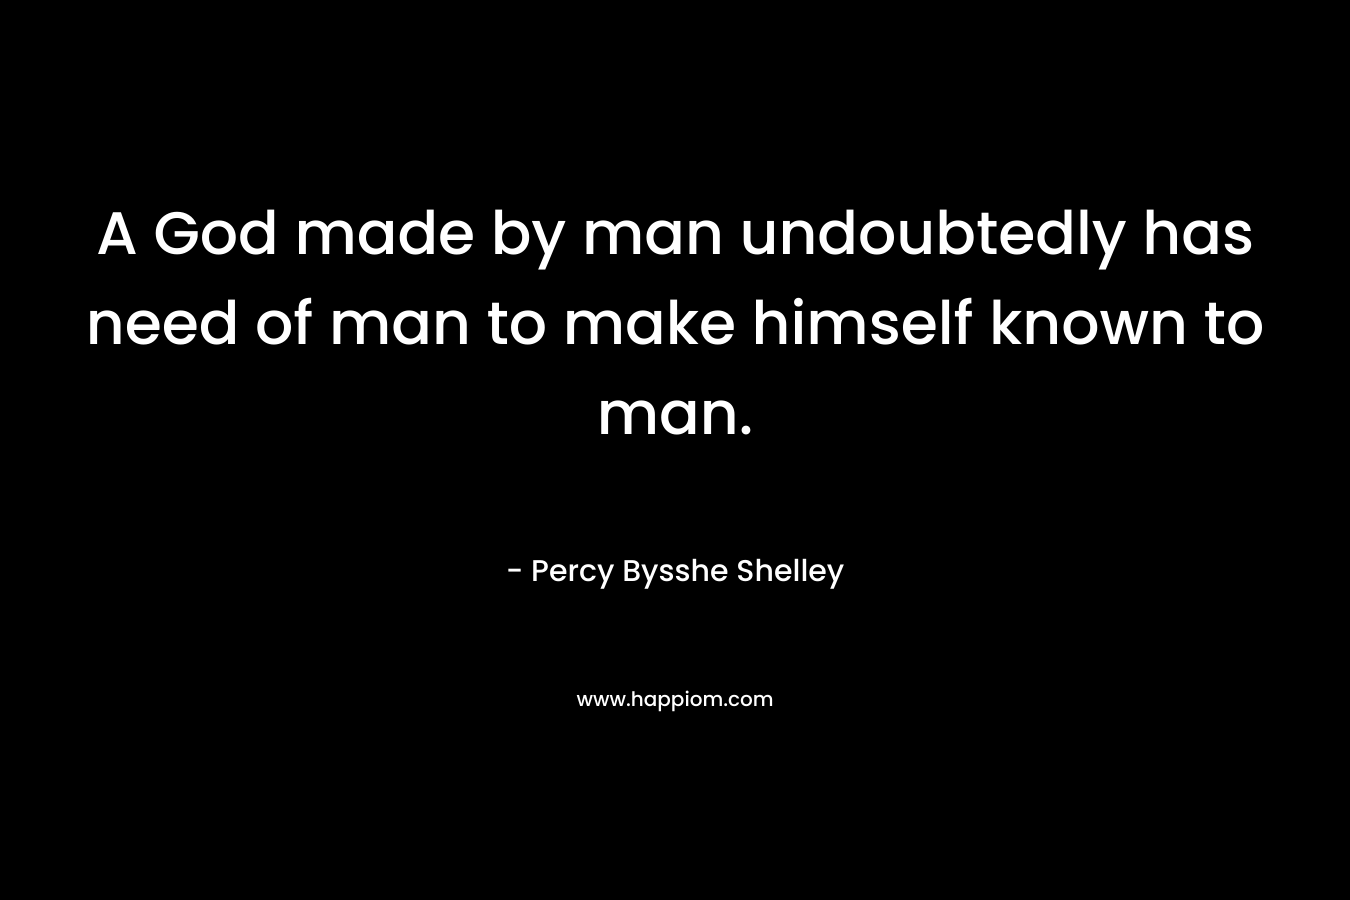 A God made by man undoubtedly has need of man to make himself known to man.